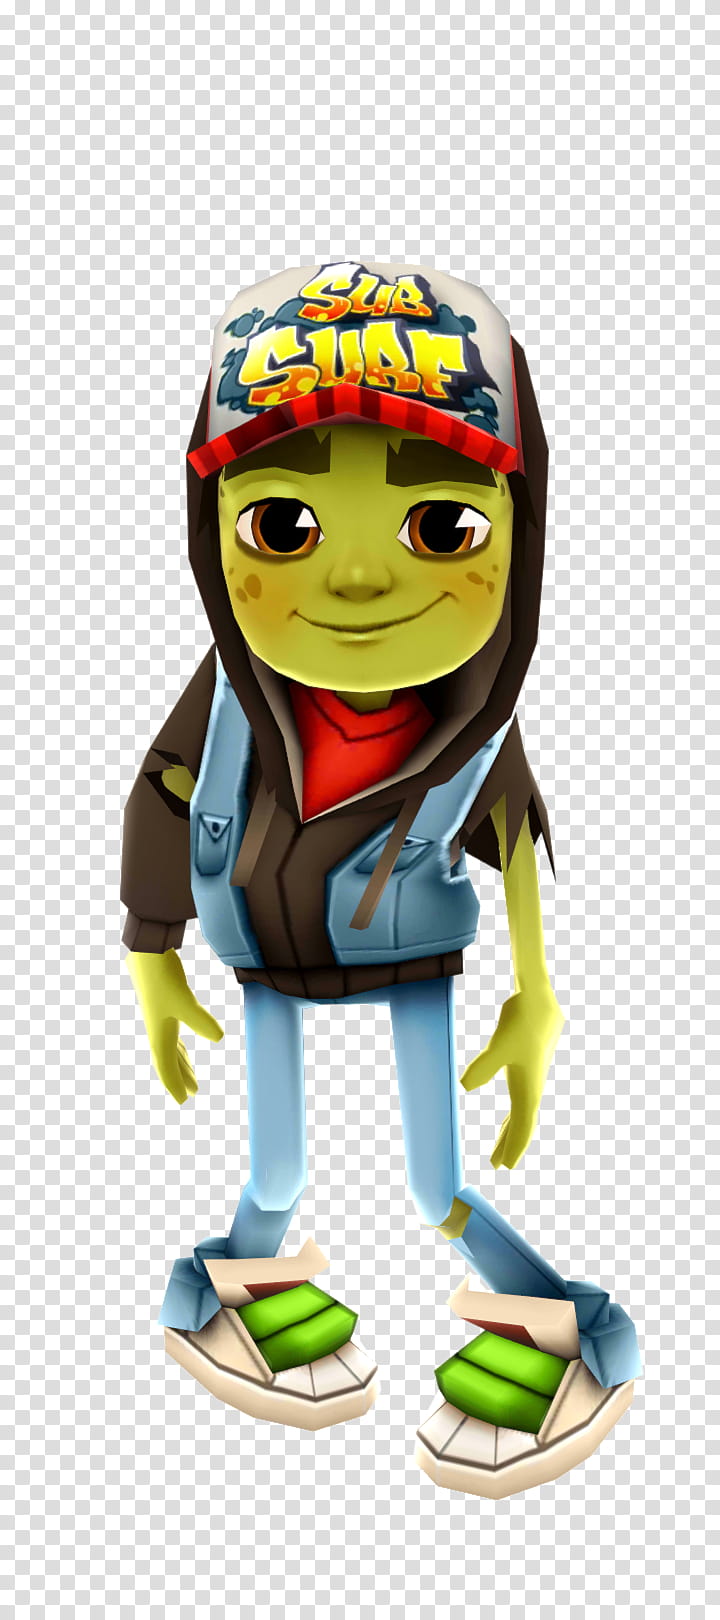 Zombie, Subway Surfers, Endless Running, Video Games, Character, Touchscreen, Graffiti, Cartoon transparent background PNG clipart